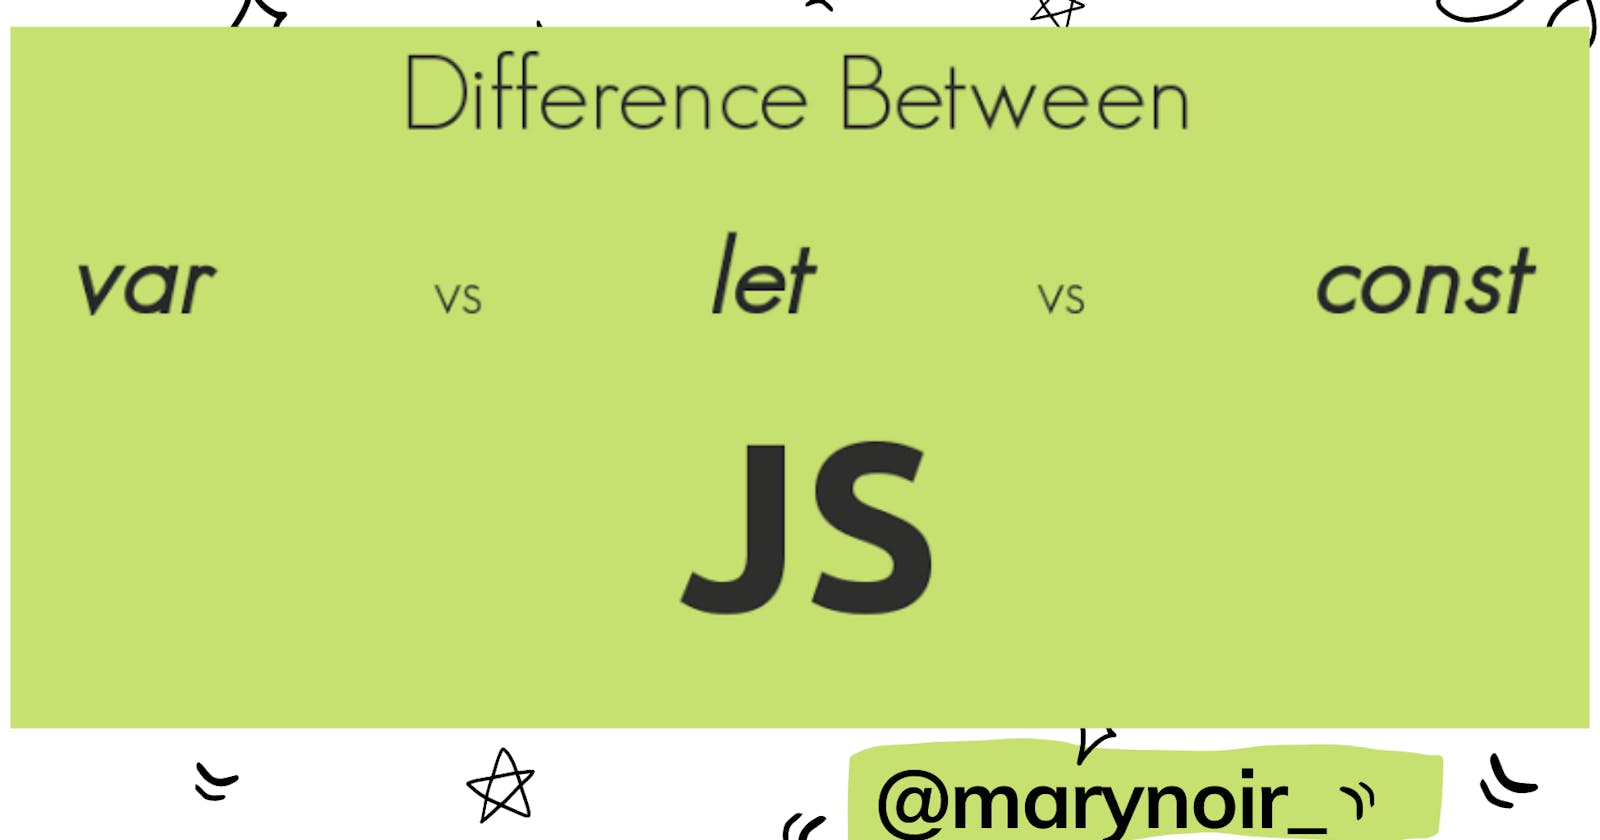 Difference between Javascript var, let and const